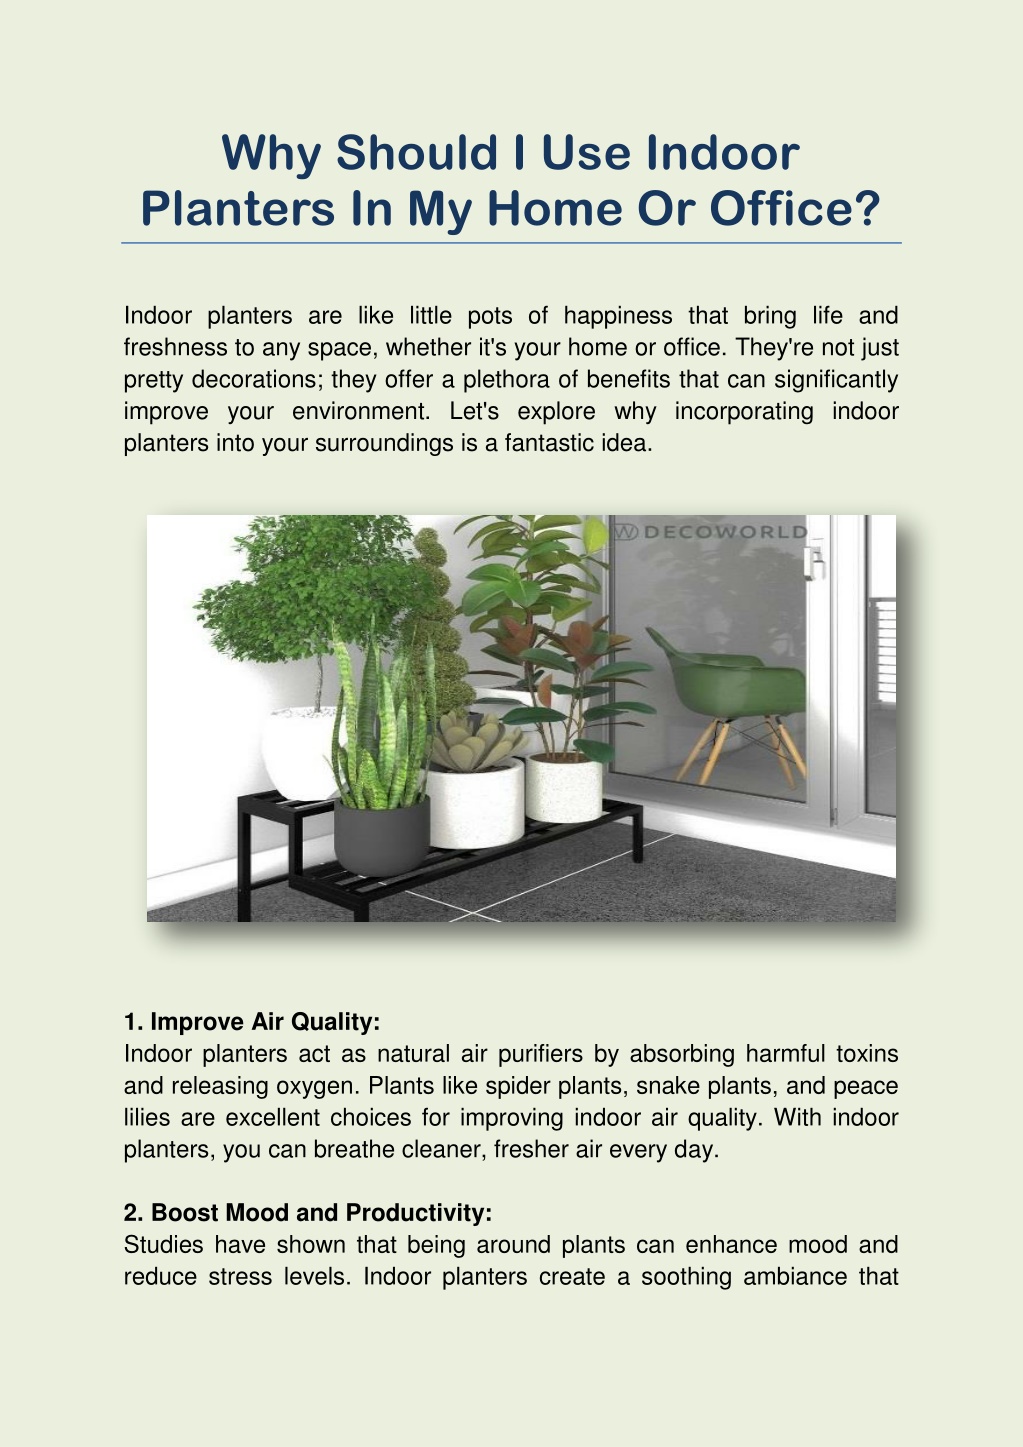 why should i use indoor planters in my home l.w